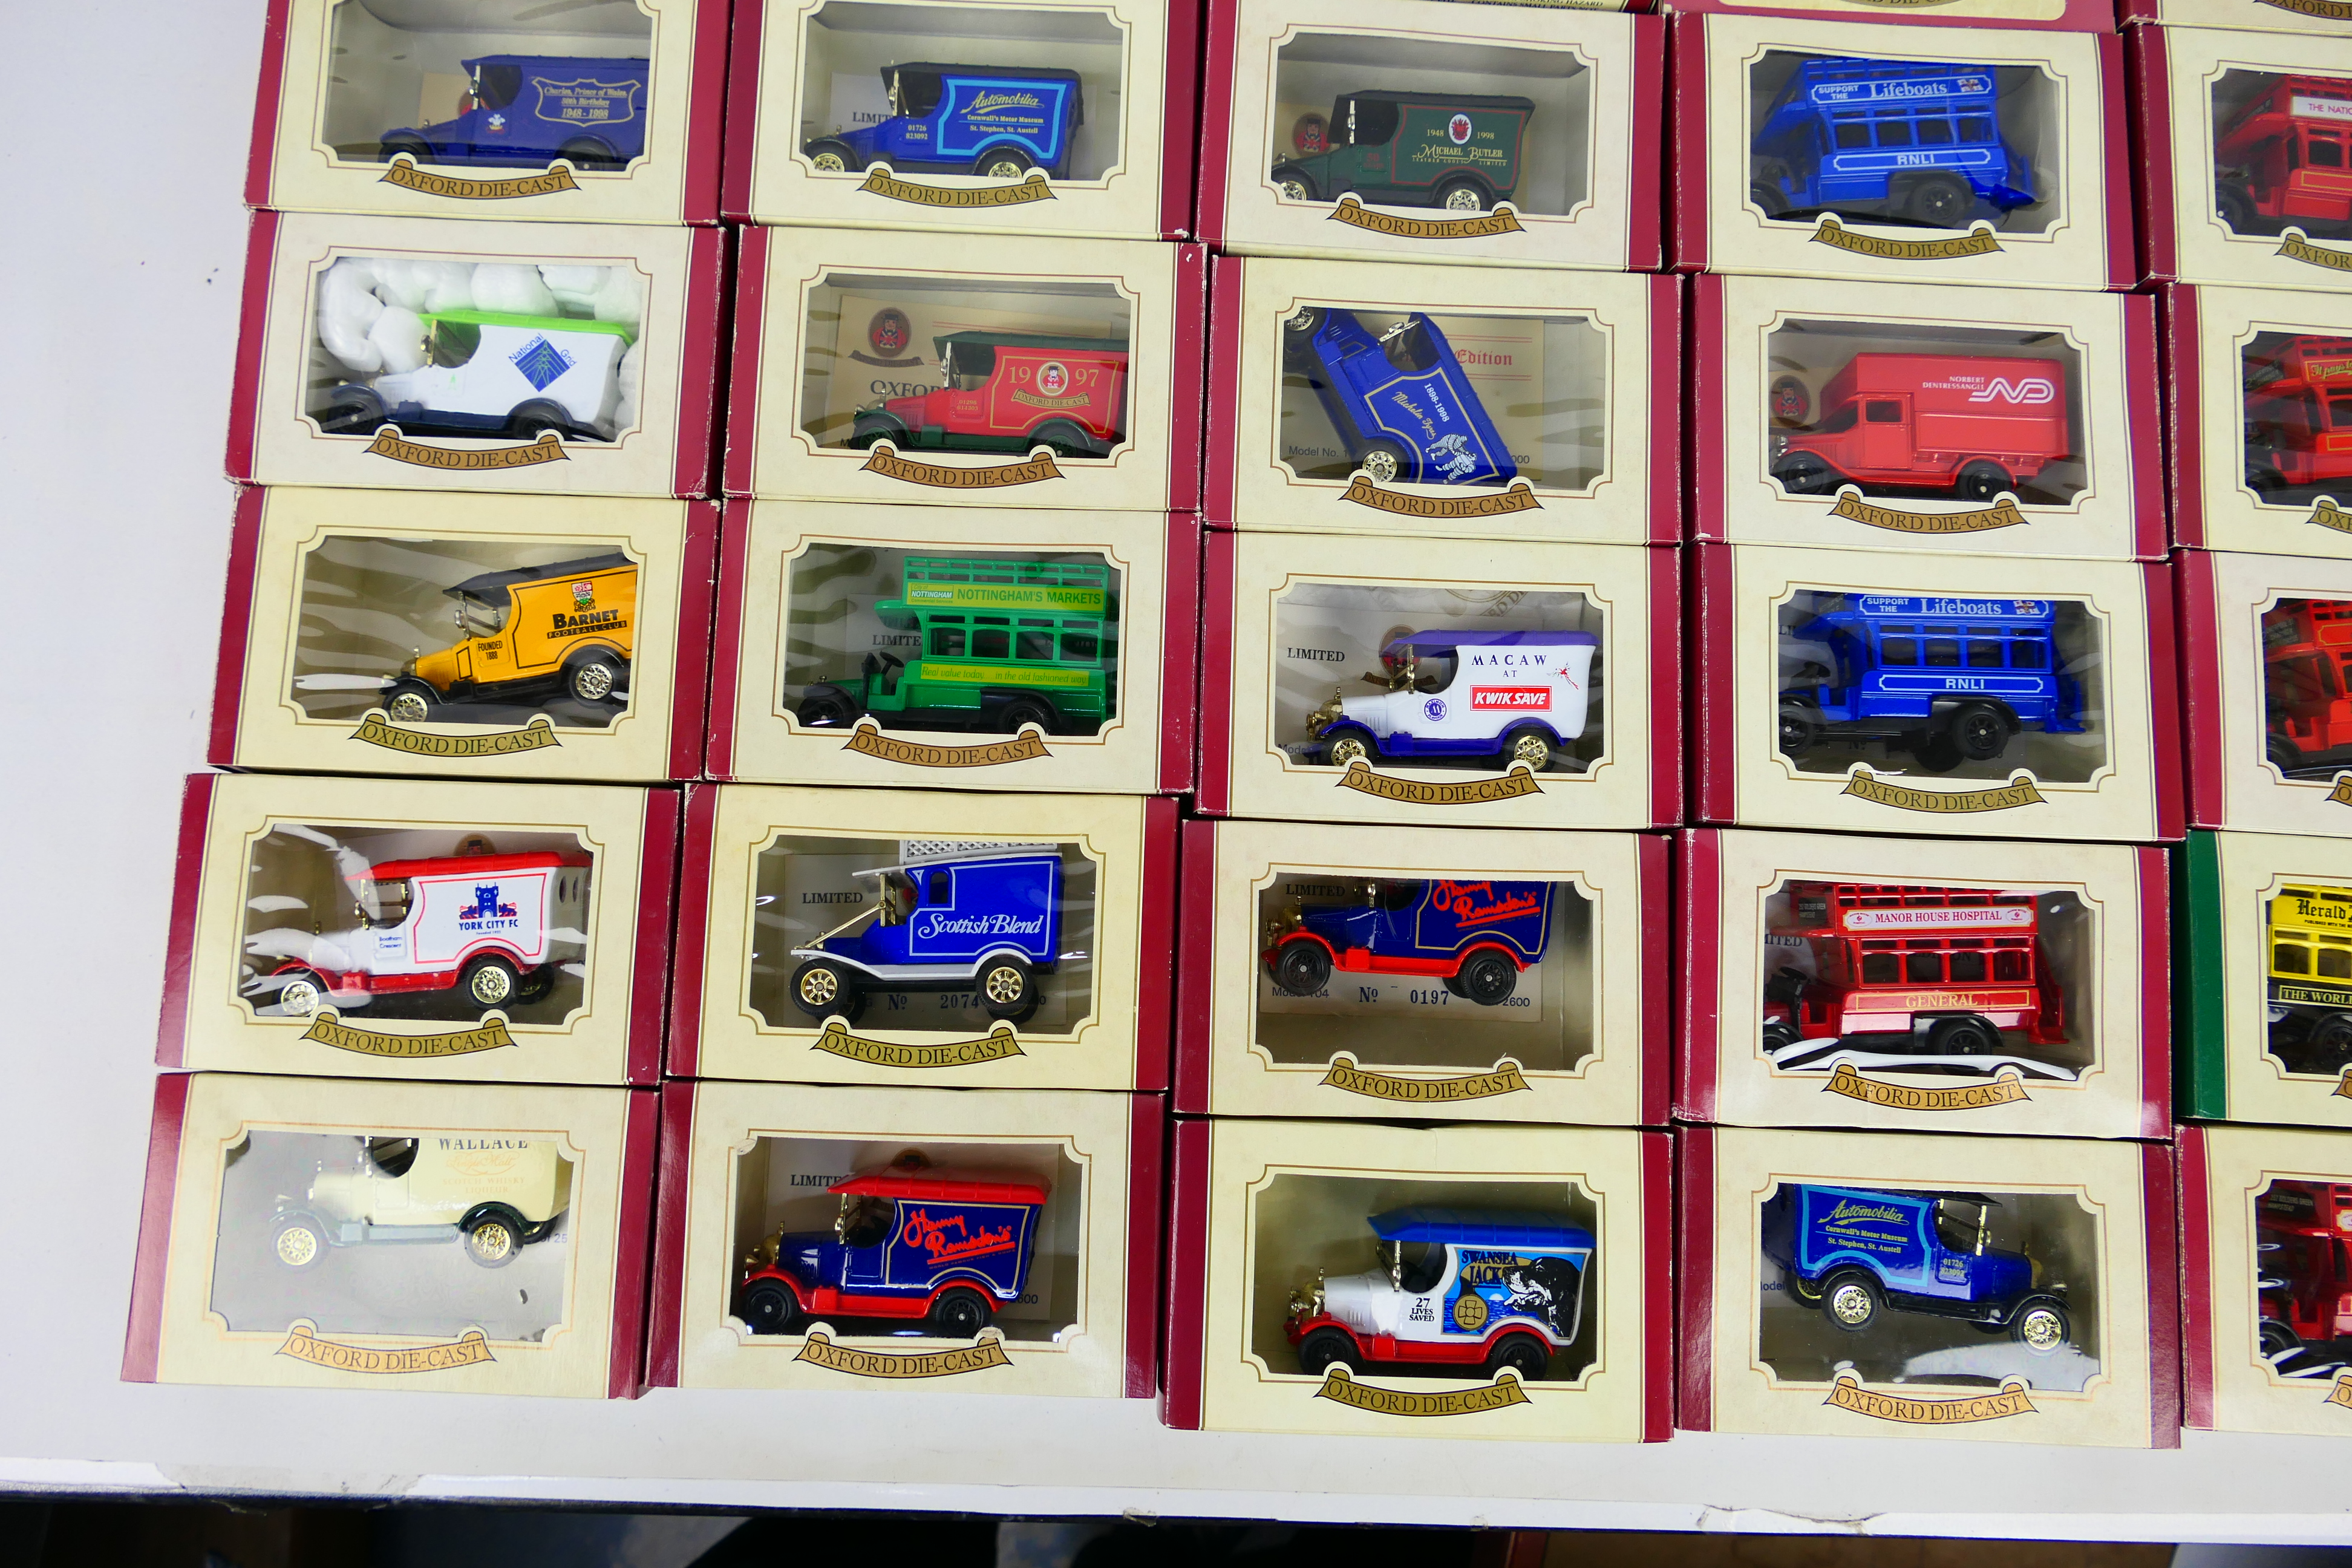 Oxford Diecast - A collection of 30 Oxford Diecast Metal vehicles including National Grid, Charles, - Image 3 of 5